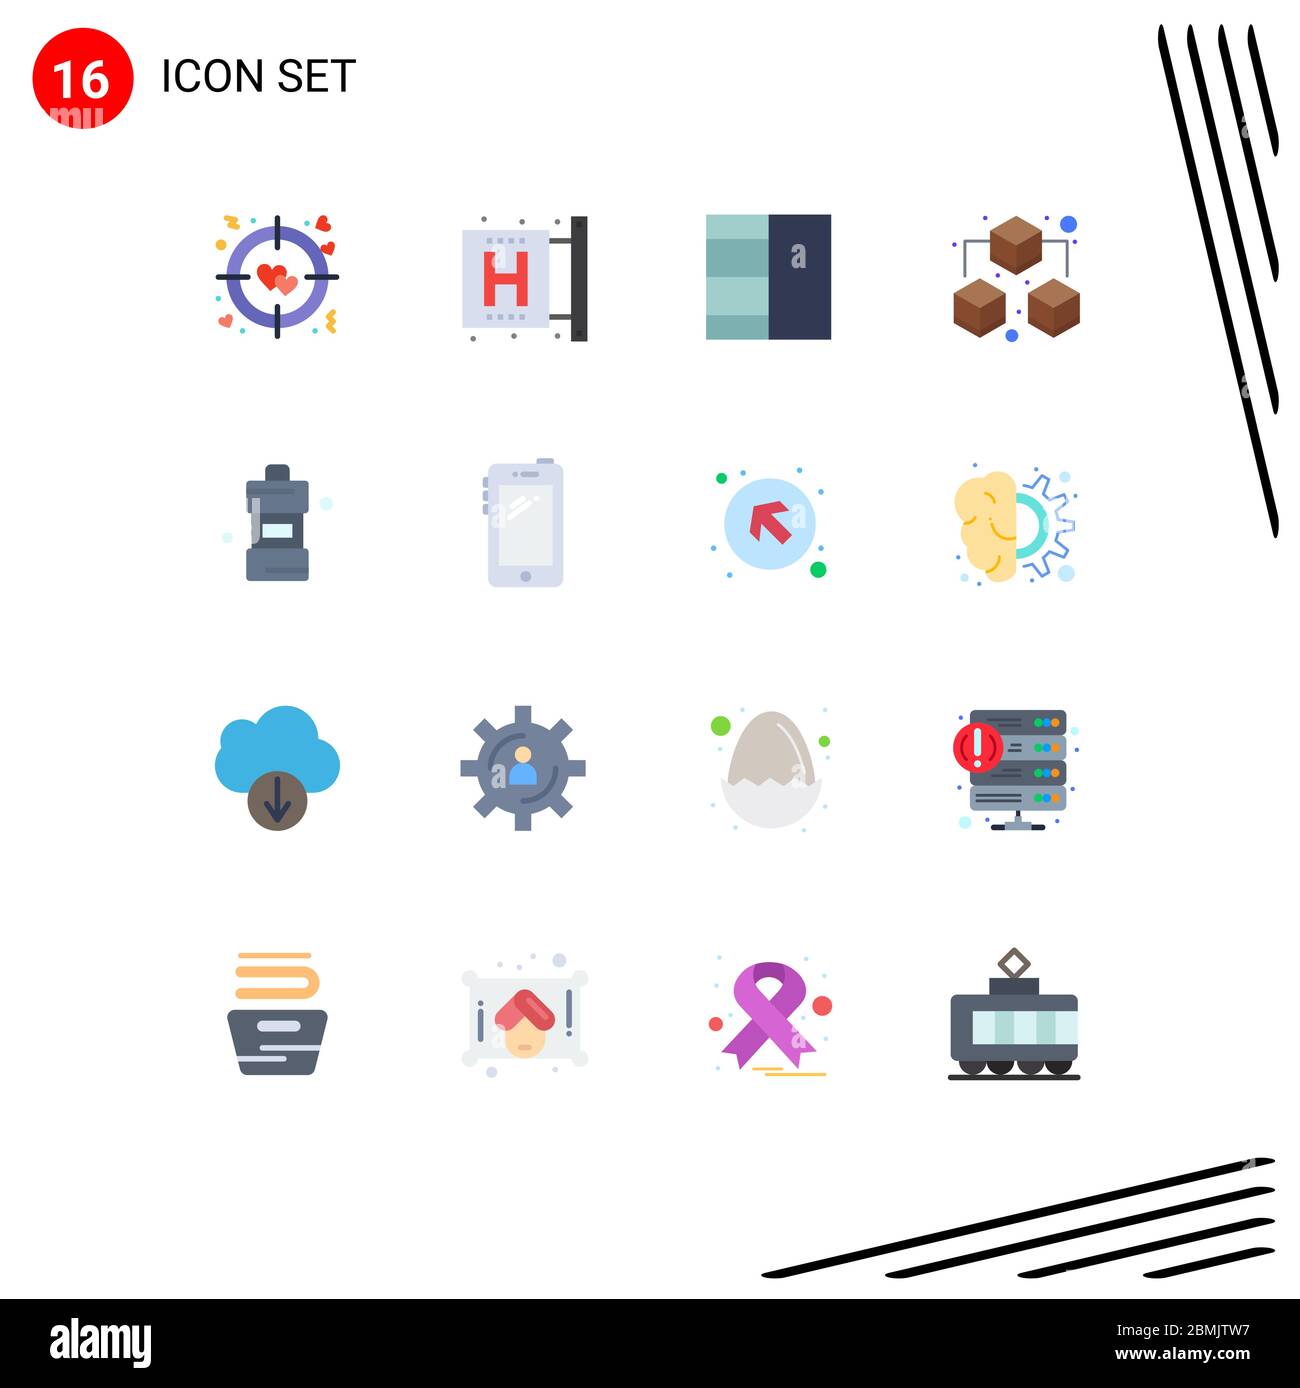 Universal Icon Symbols Group of 16 Modern Flat Colors of phone, cleaning, grid, cleaner, sharing Editable Pack of Creative Vector Design Elements Stock Vector